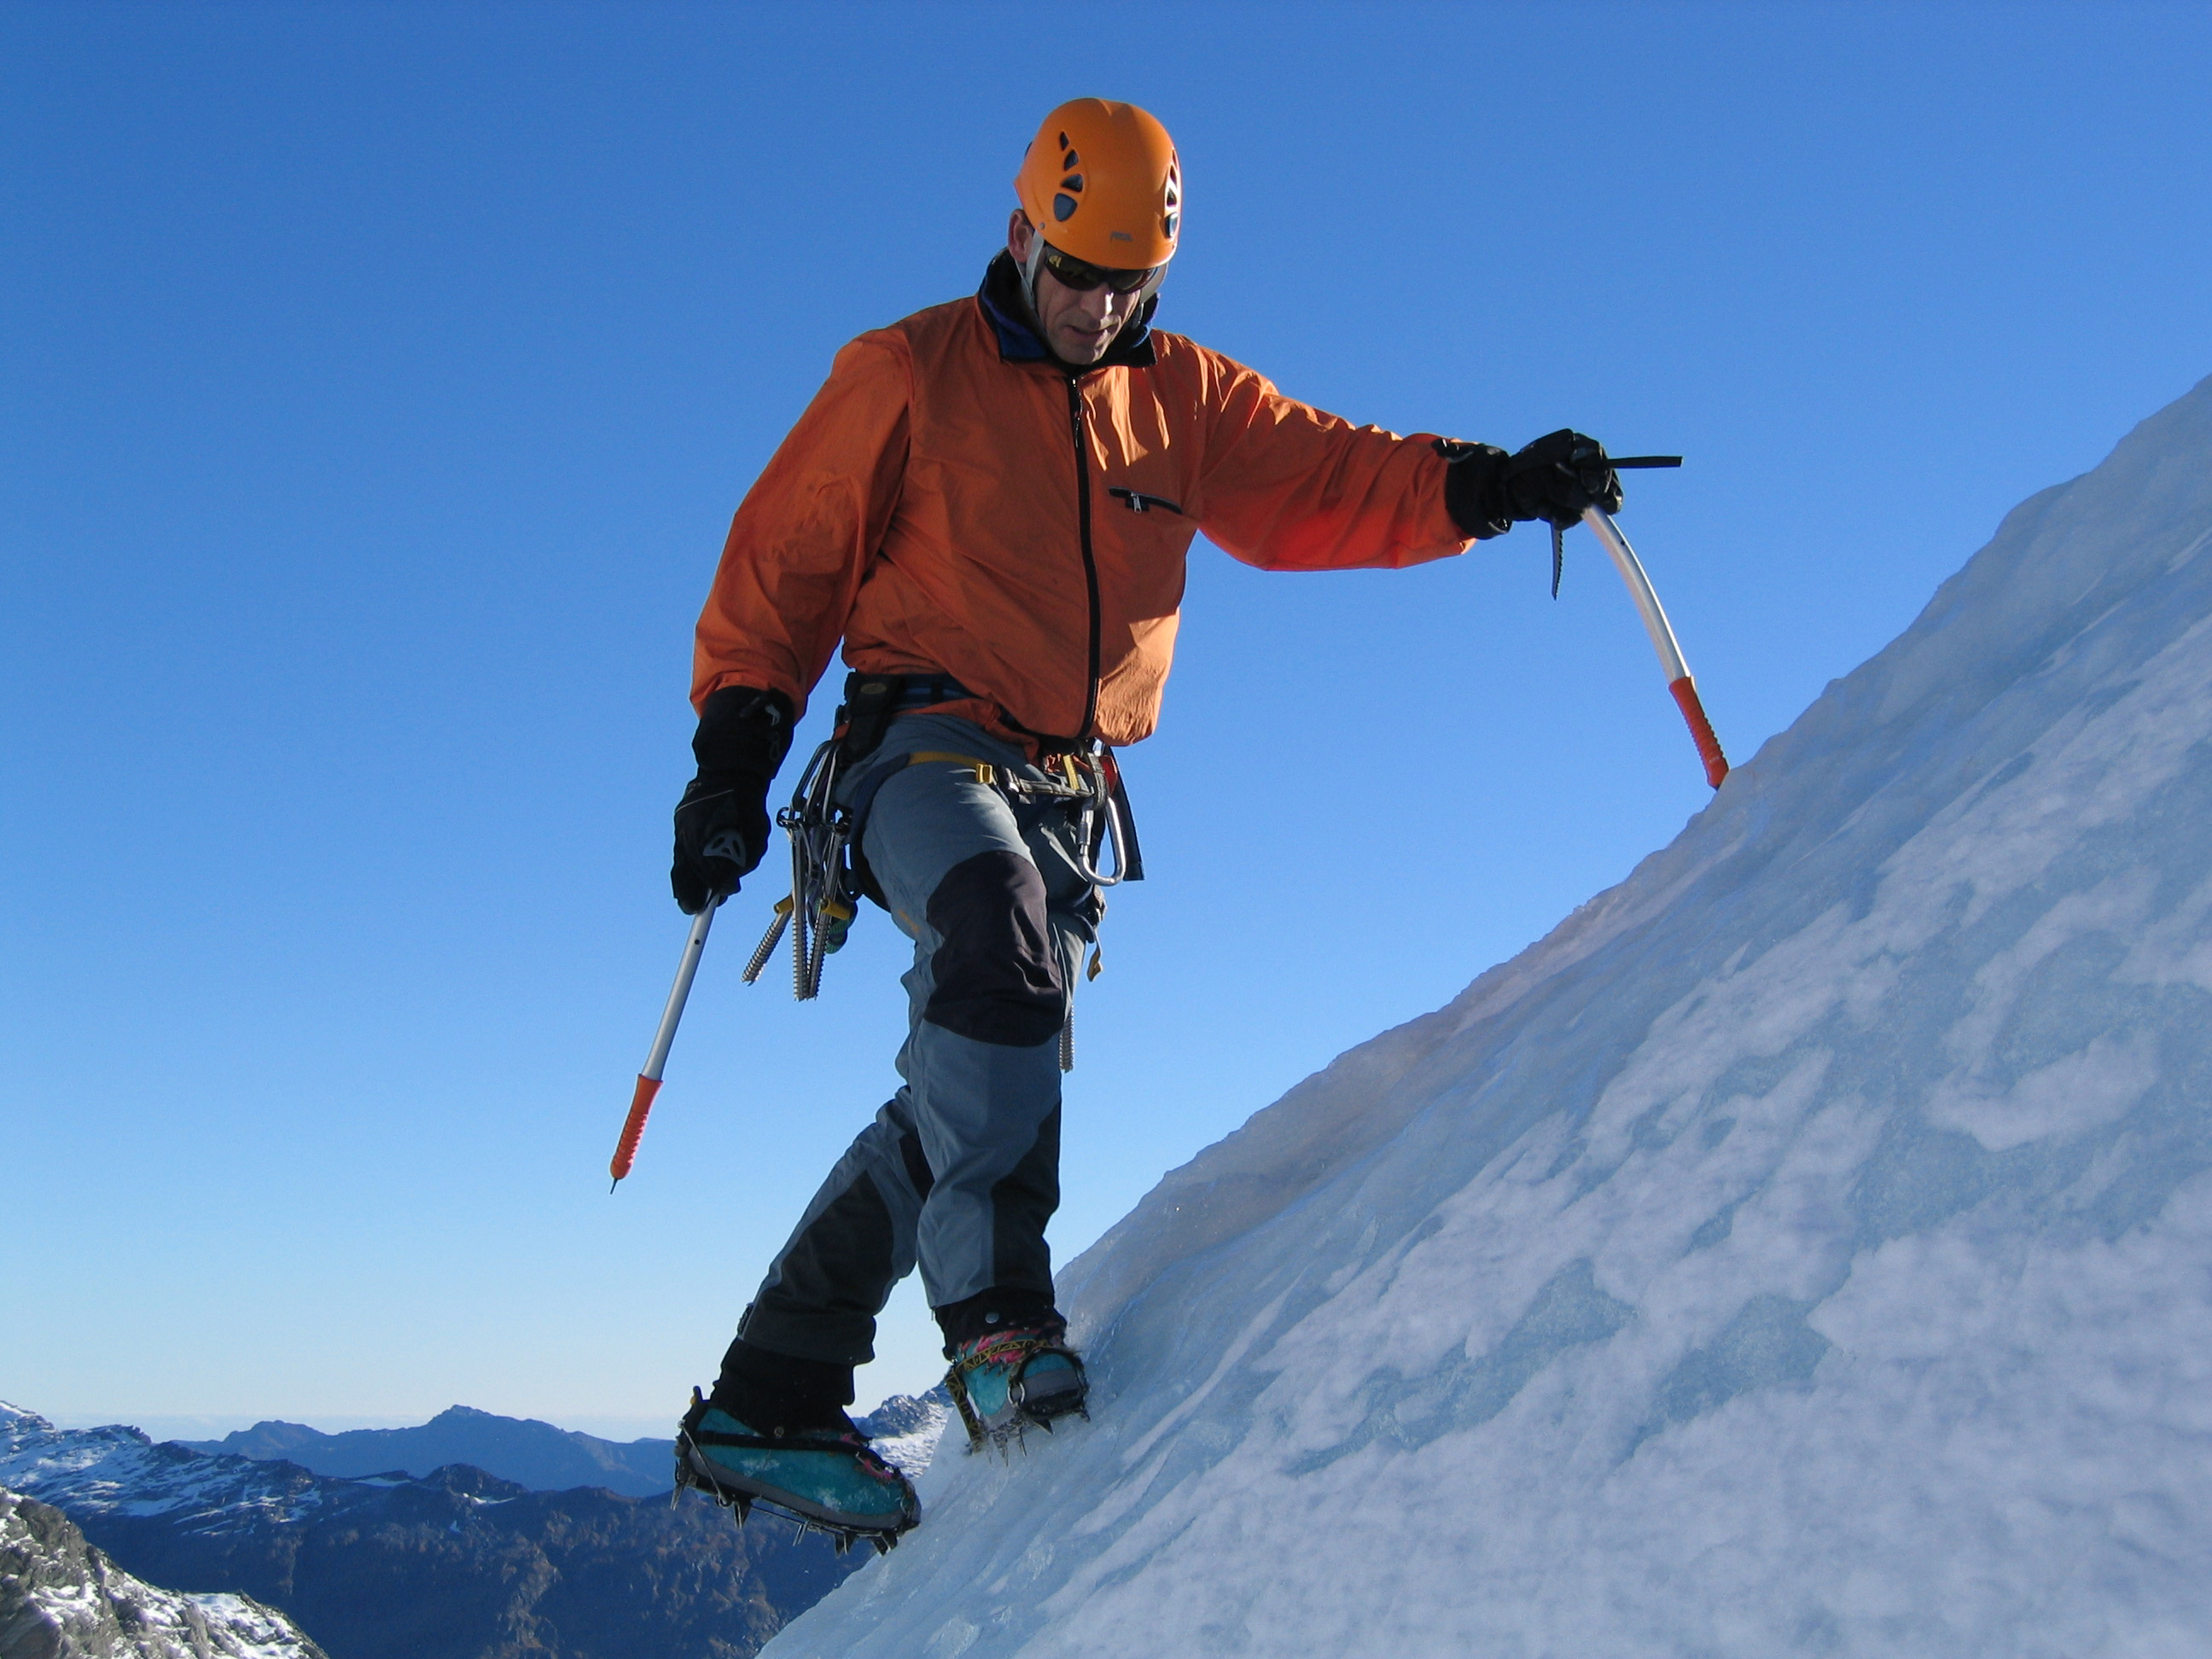 Guy Cotter climbing on snow